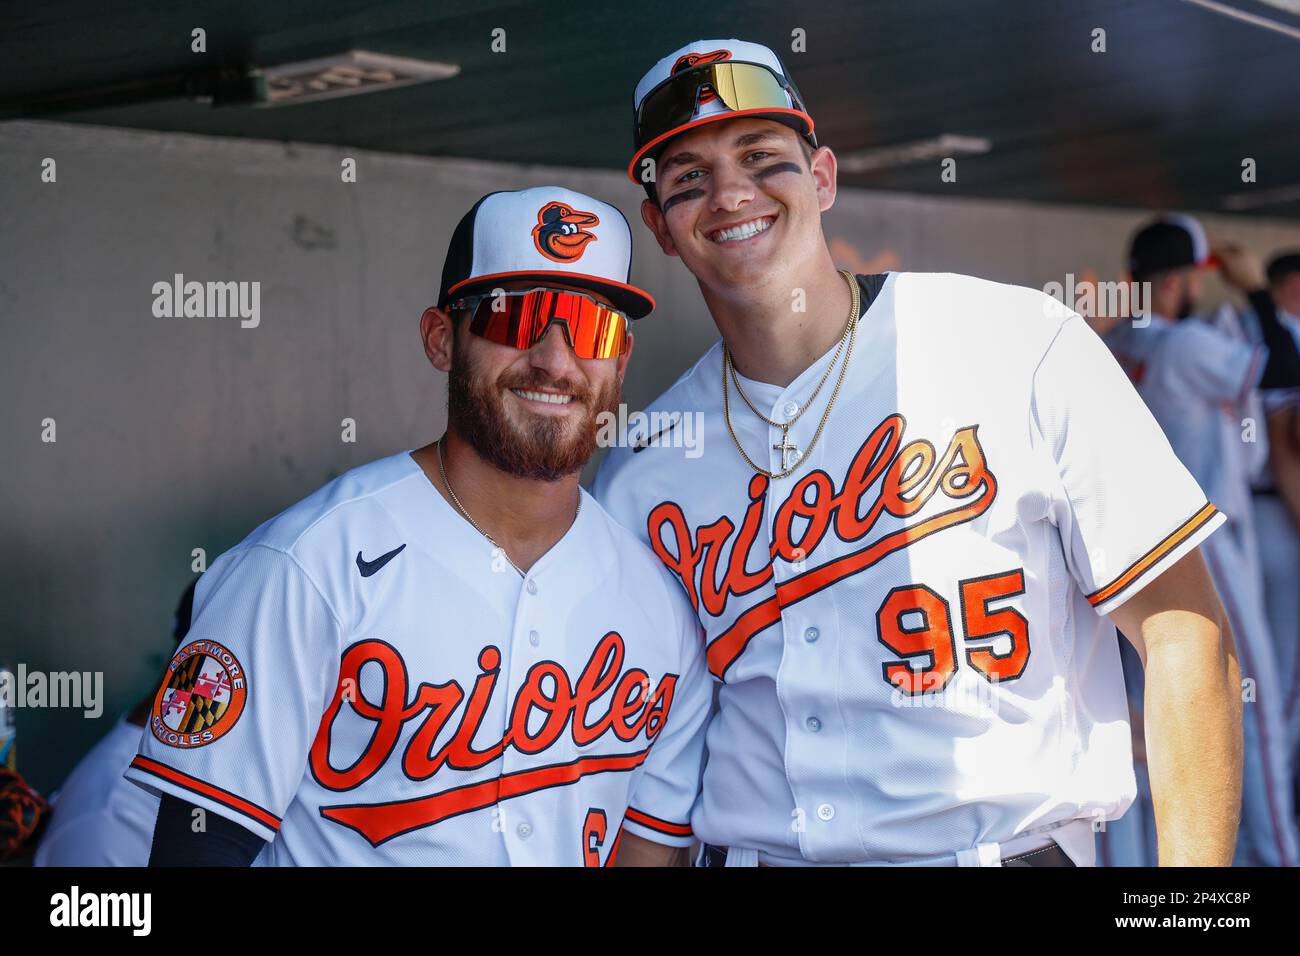 Sarasota FL USA; Baltimore Orioles shortstop Joey Ortiz (65) and infielder Coby Mayo (95) pose for a photo during an MLB spring training game against Stock Photo